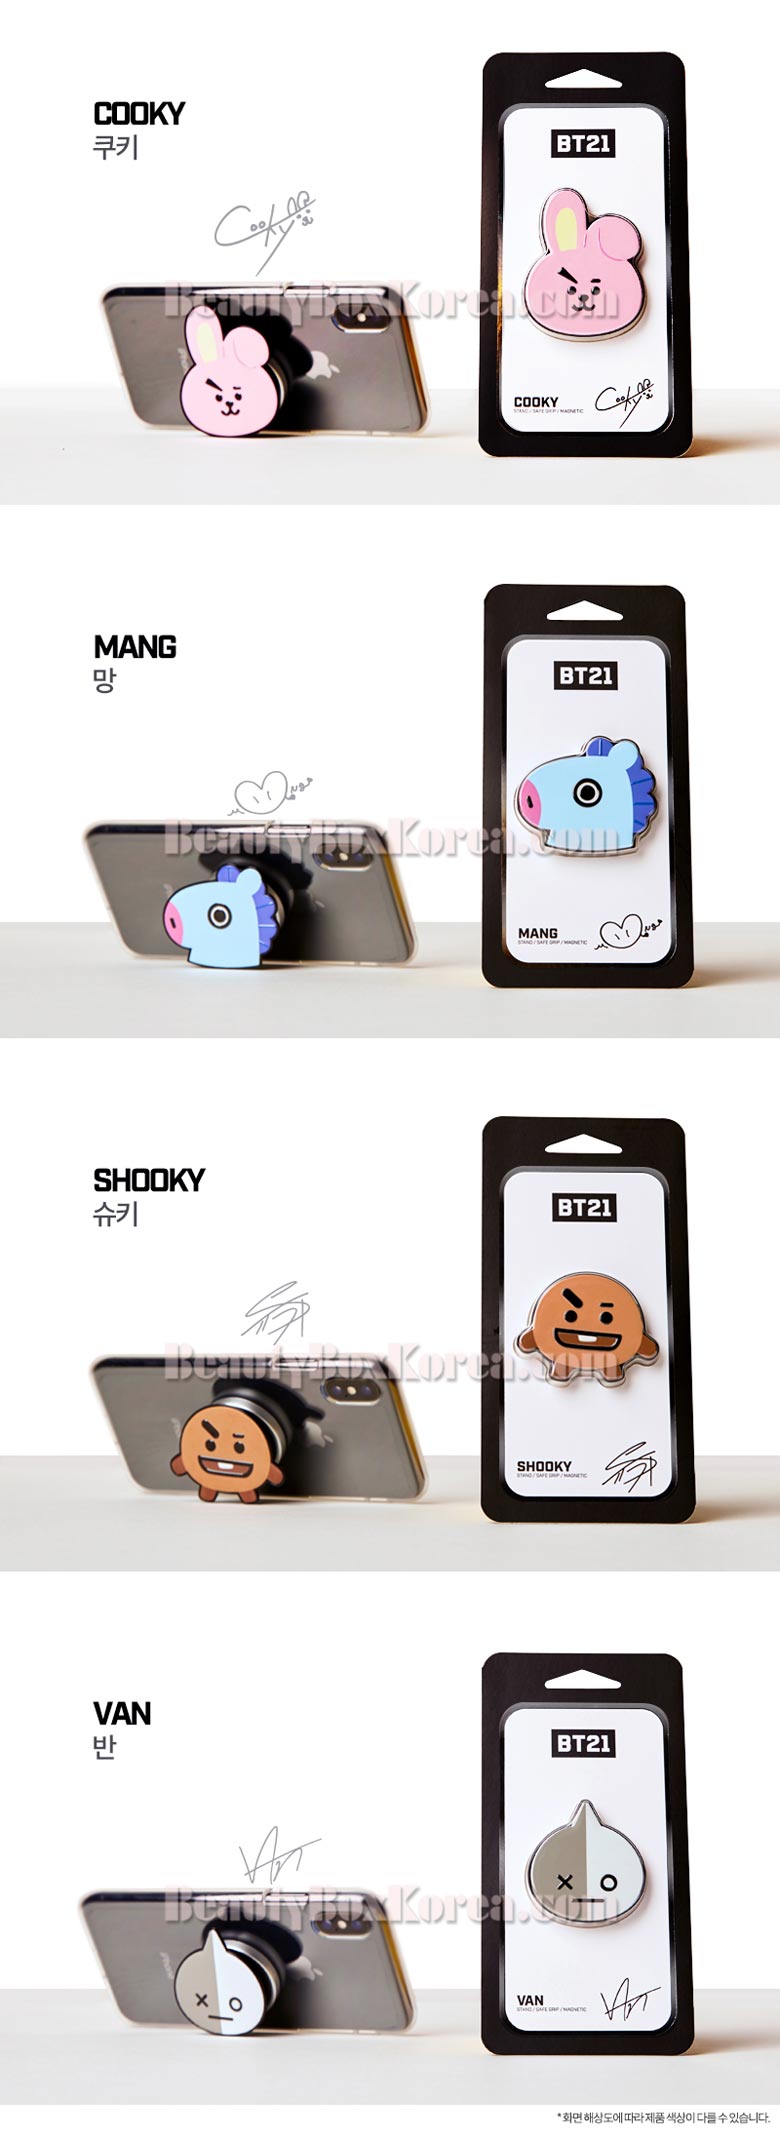 BT21 Smart Grip Tok 1ea  Best Price and Fast Shipping from Beauty